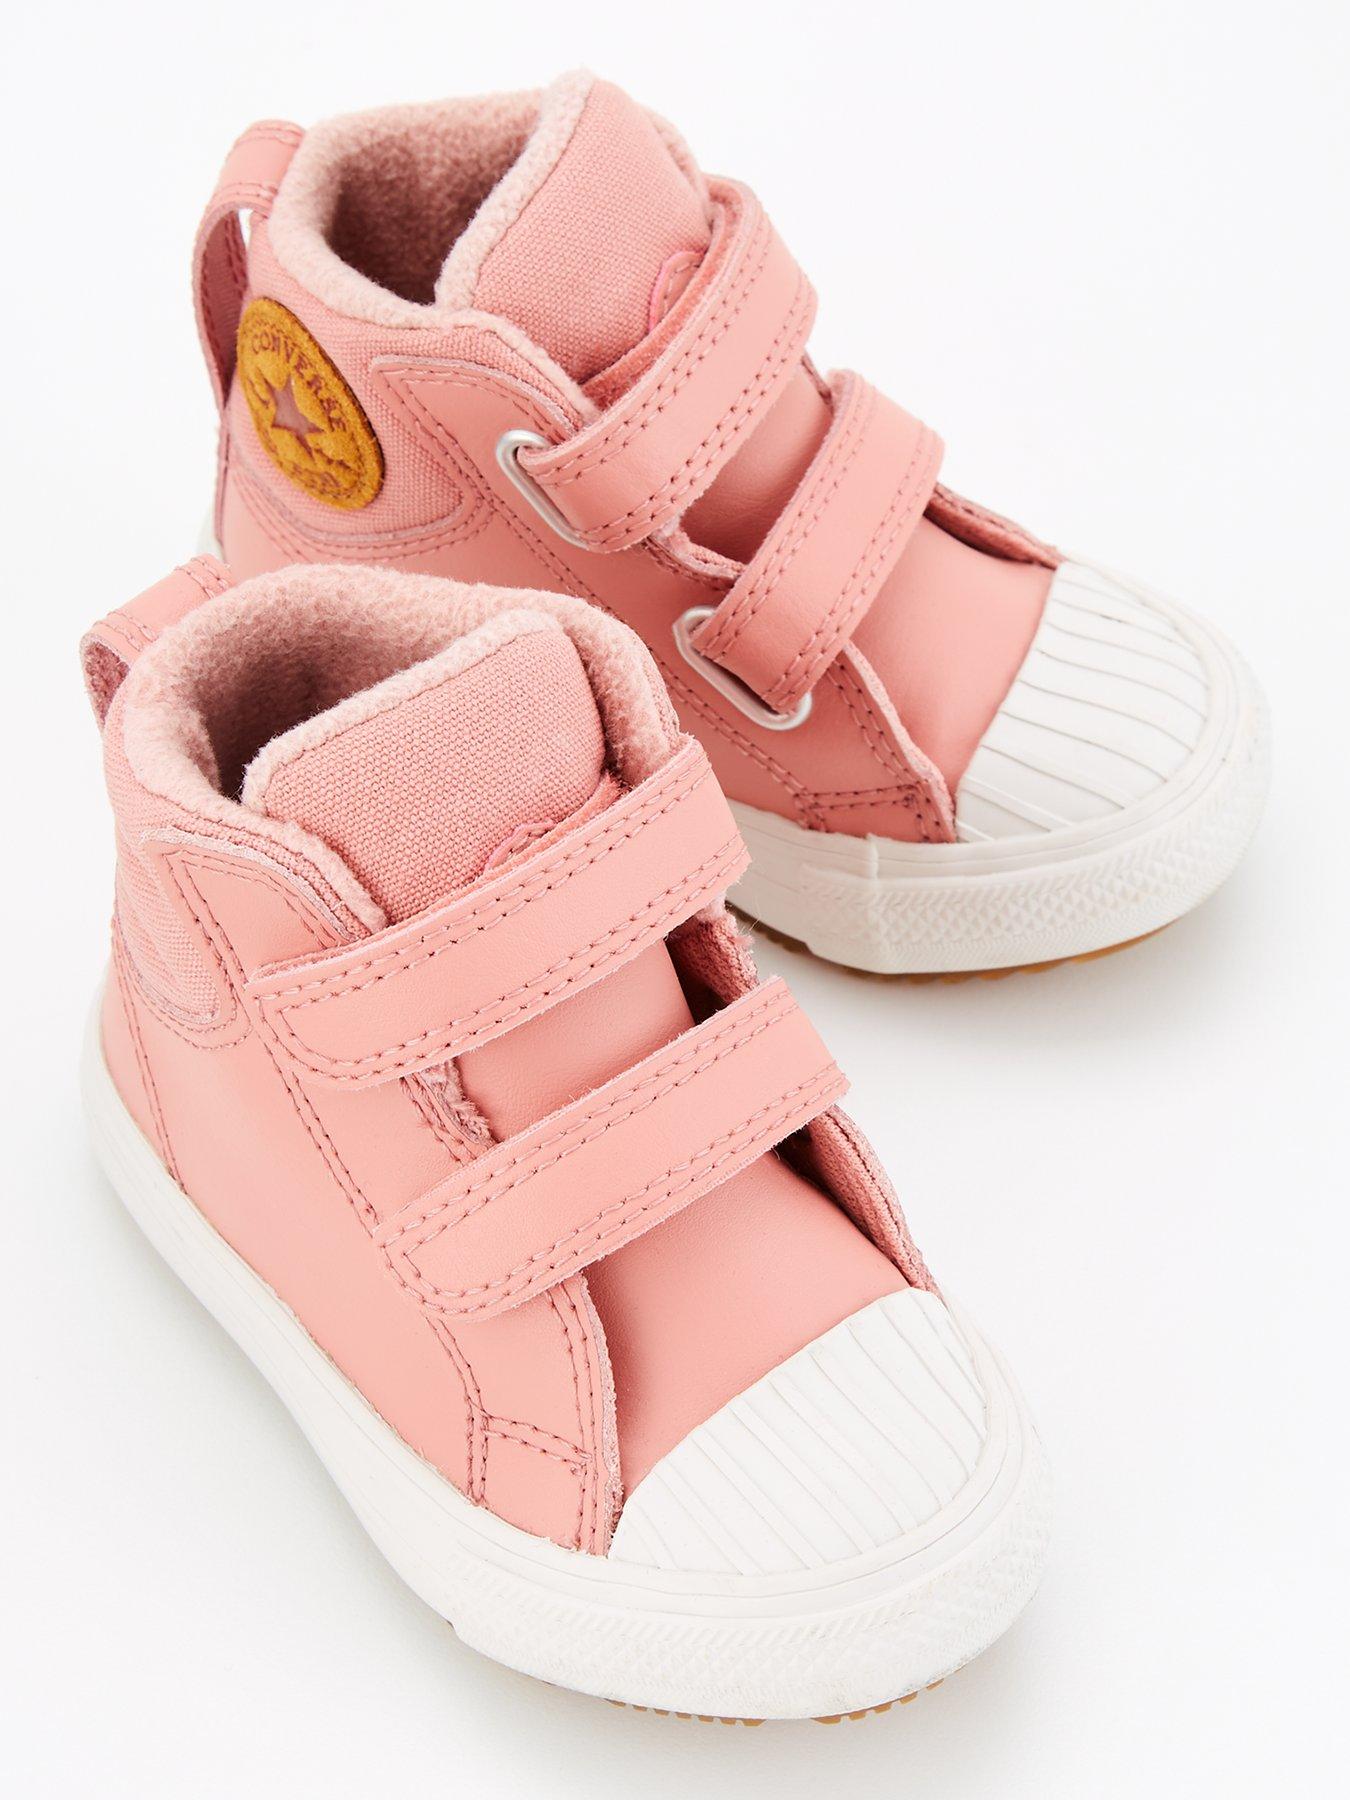 Prestige Sidst Mona Lisa Converse Chuck Taylor All Star Berkshire Boot Hi Infant Trainer - Pink/White  | very.co.uk